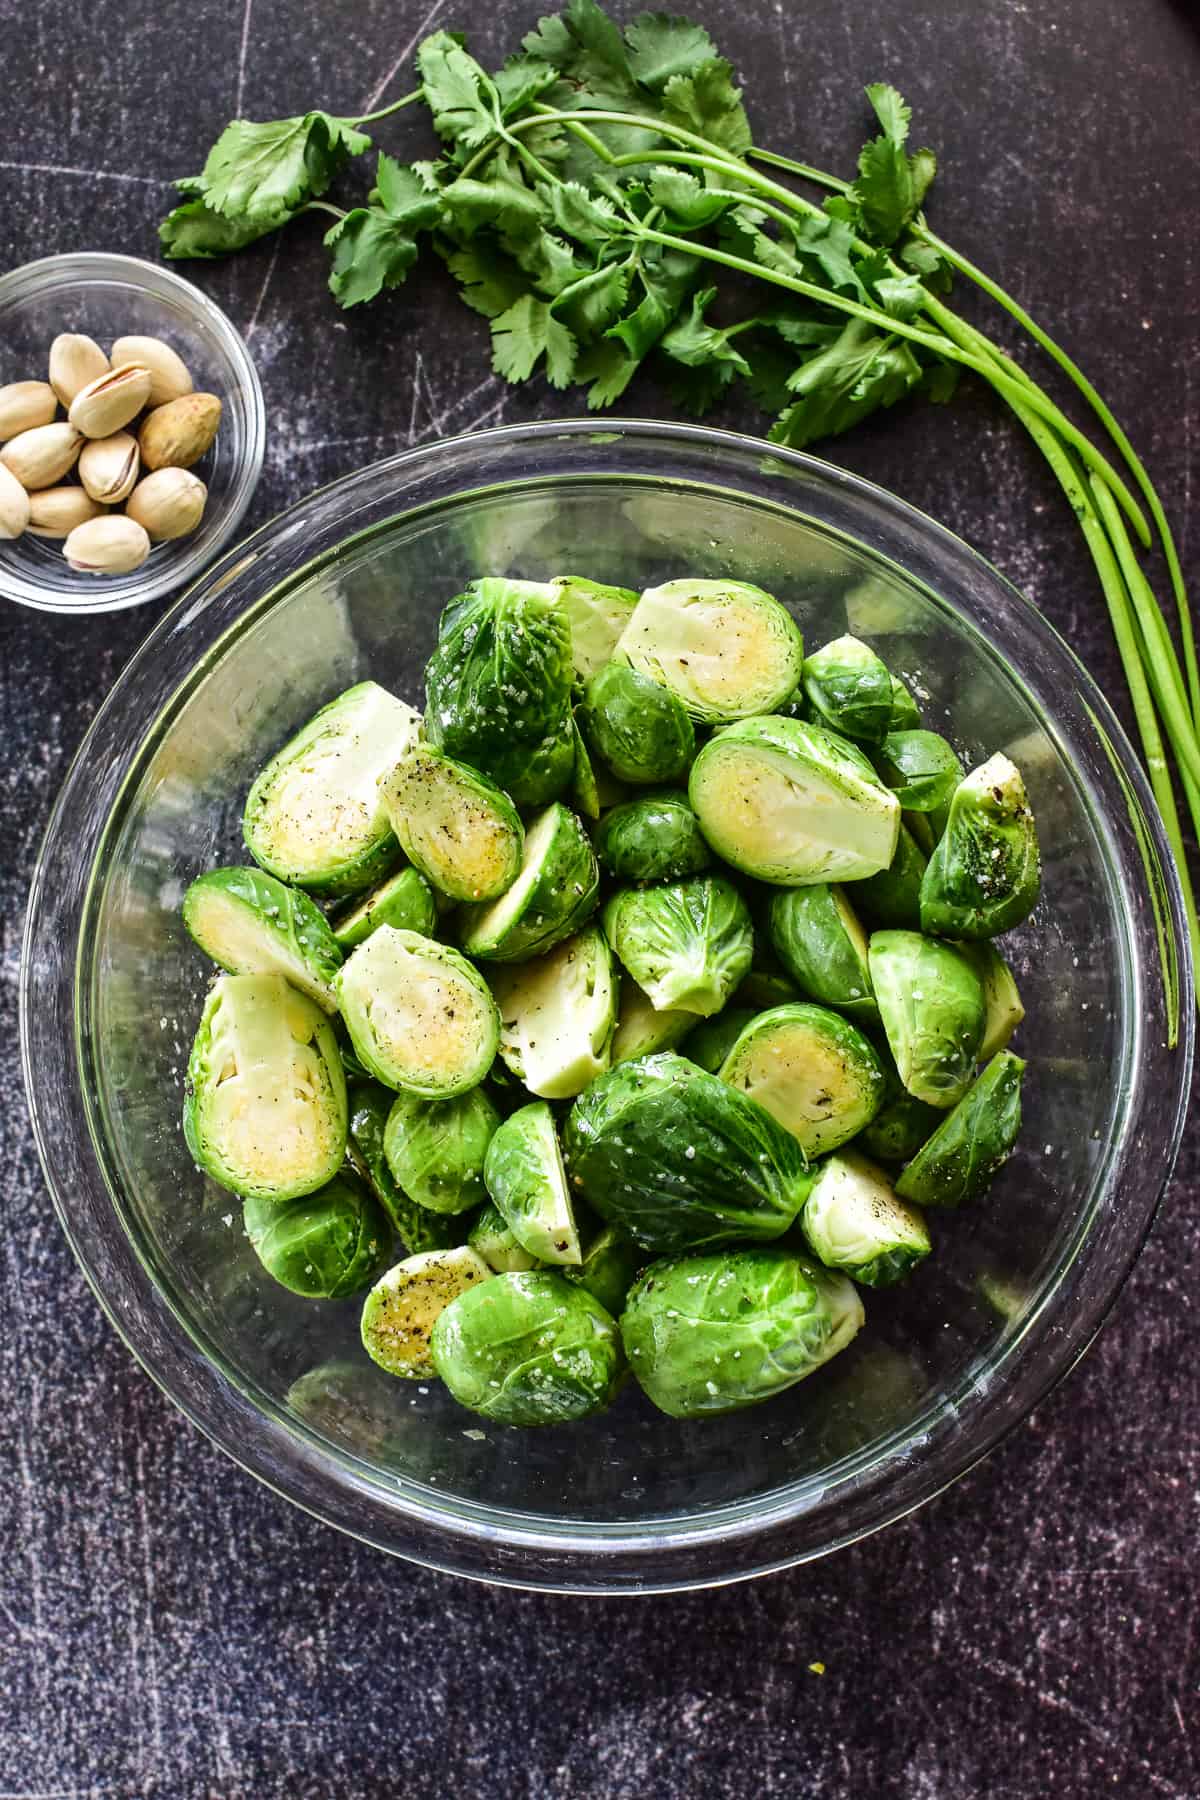 Brussels Sprouts cut in half in a glass bowl with seasonings